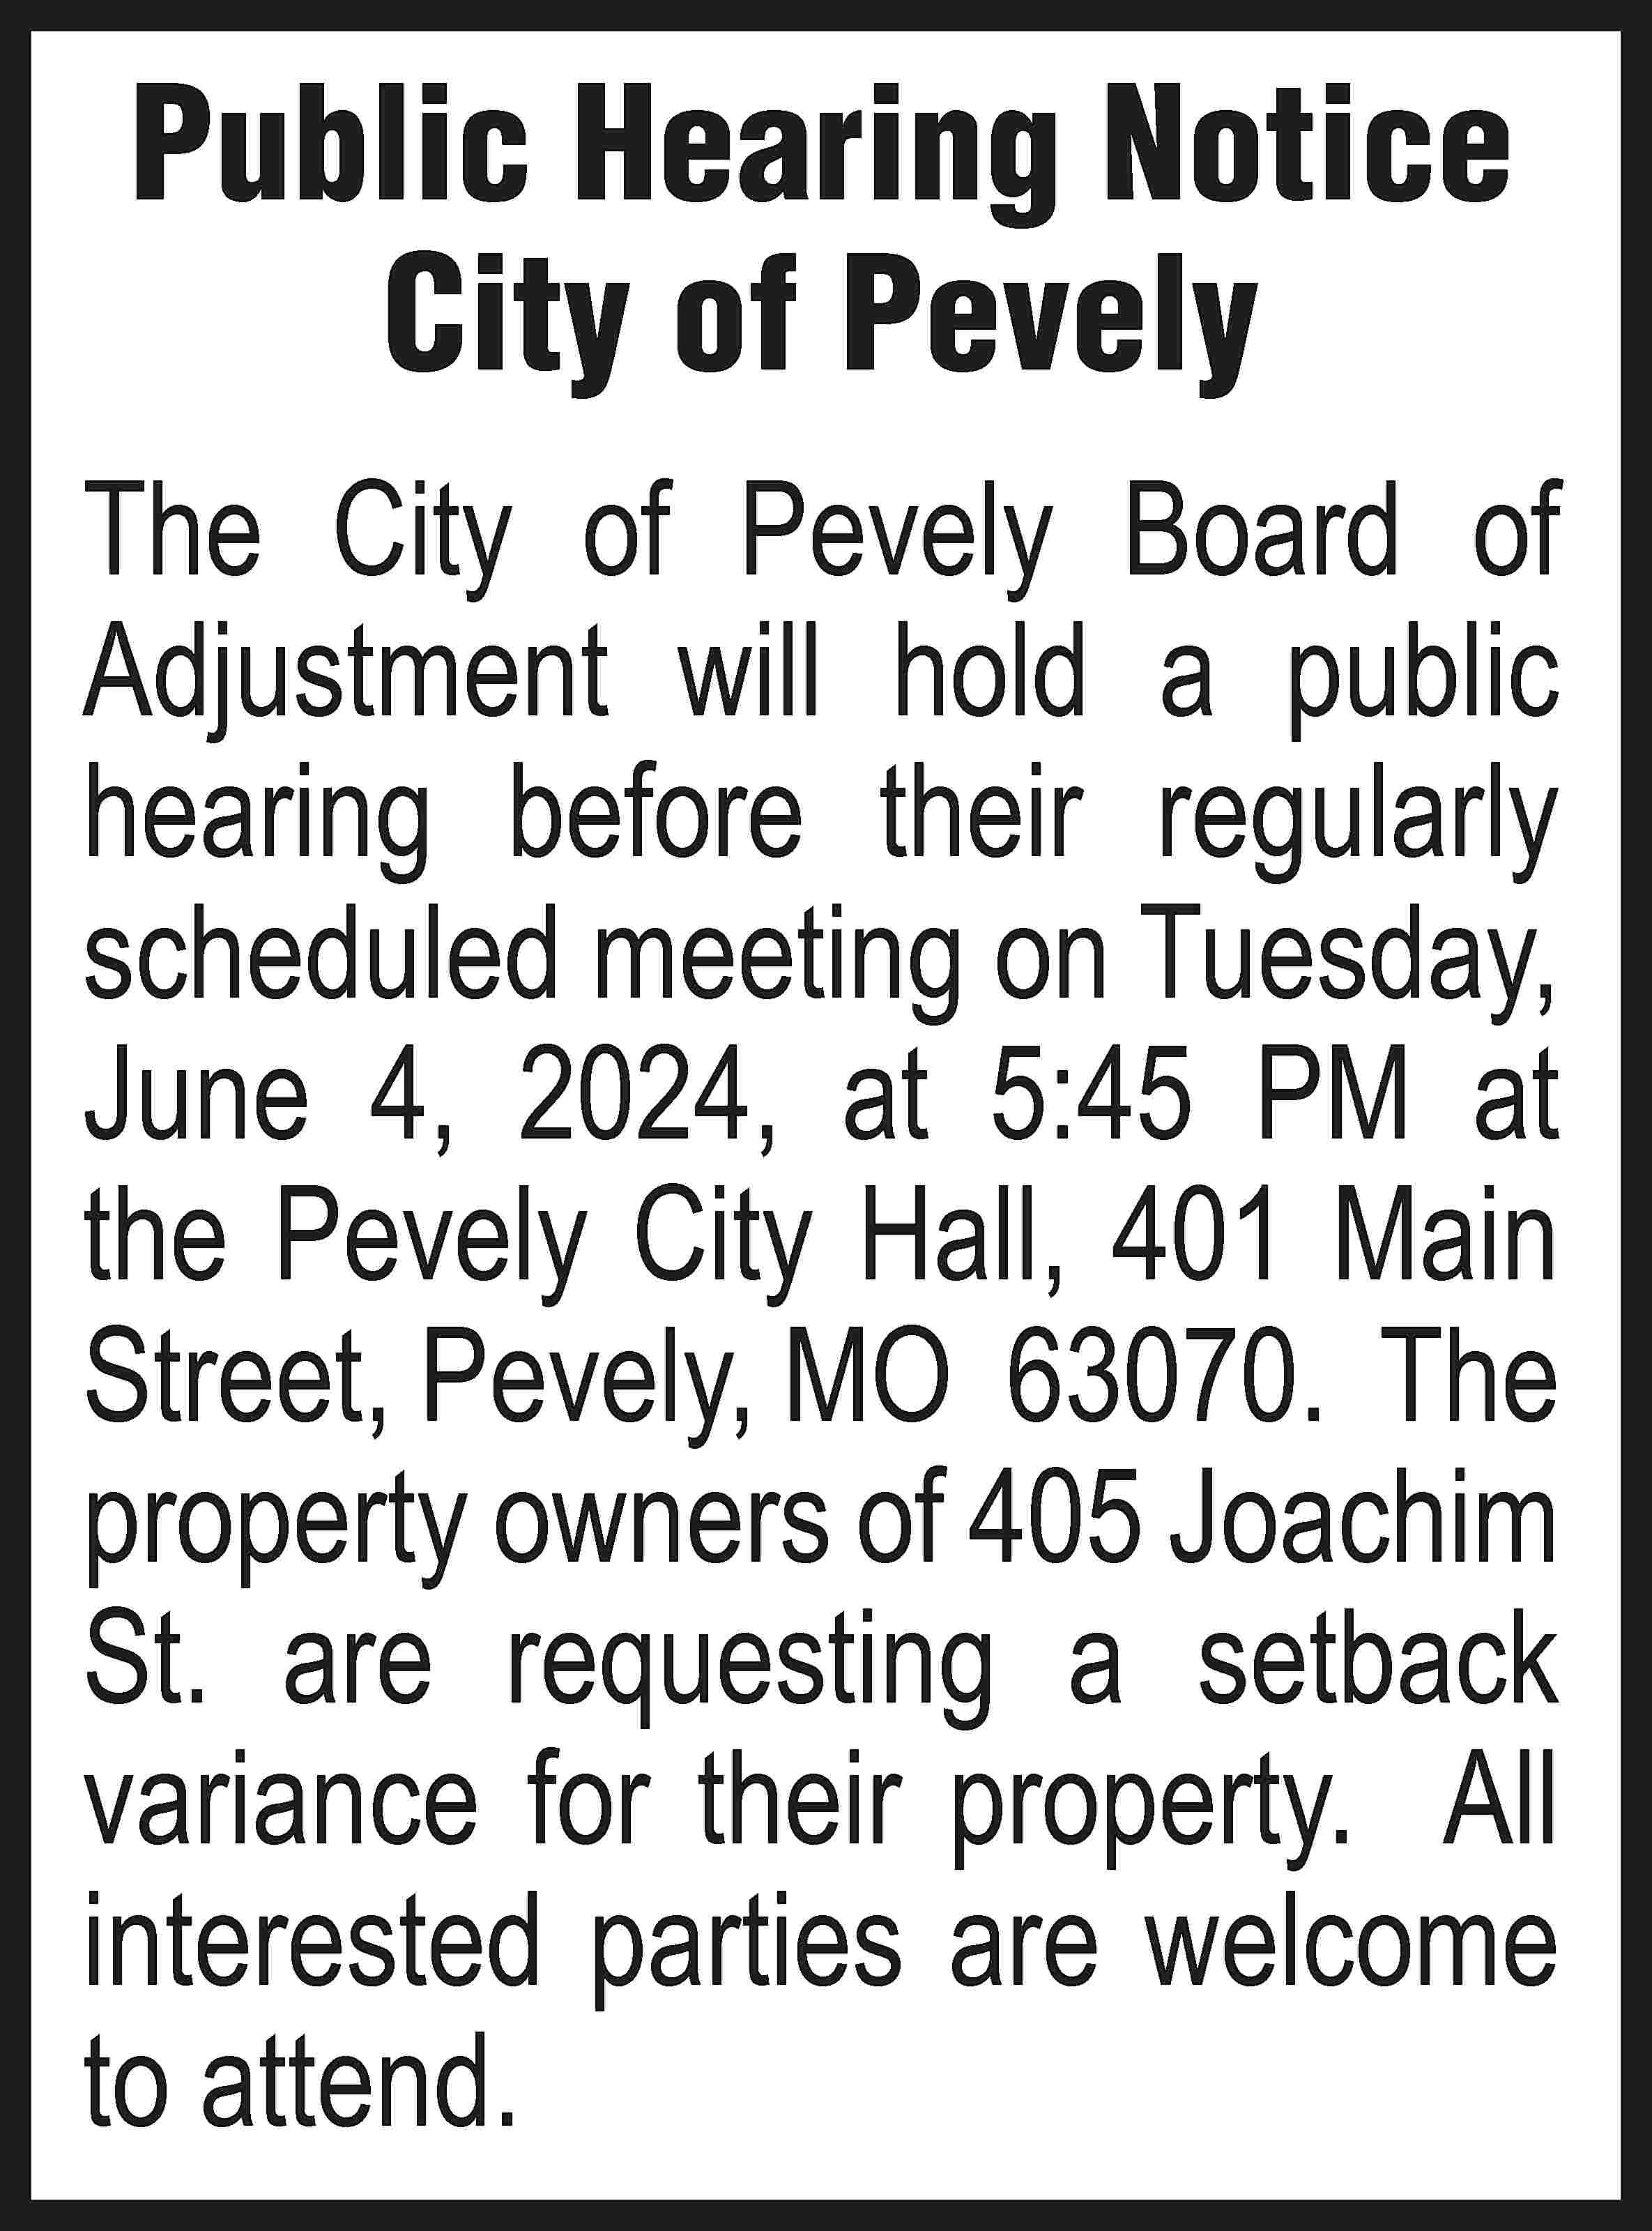 Public Hearing Notice City of  Public Hearing Notice City of Pevely The City of Pevely Board of Adjustment will hold a public hearing before their regularly scheduled meeting on Tuesday, June 4, 2024, at 5:45 PM at the Pevely City Hall, 401 Main Street, Pevely, MO 63070. The property owners of 405 Joachim St. are requesting a setback variance for their property. All interested parties are welcome to attend.